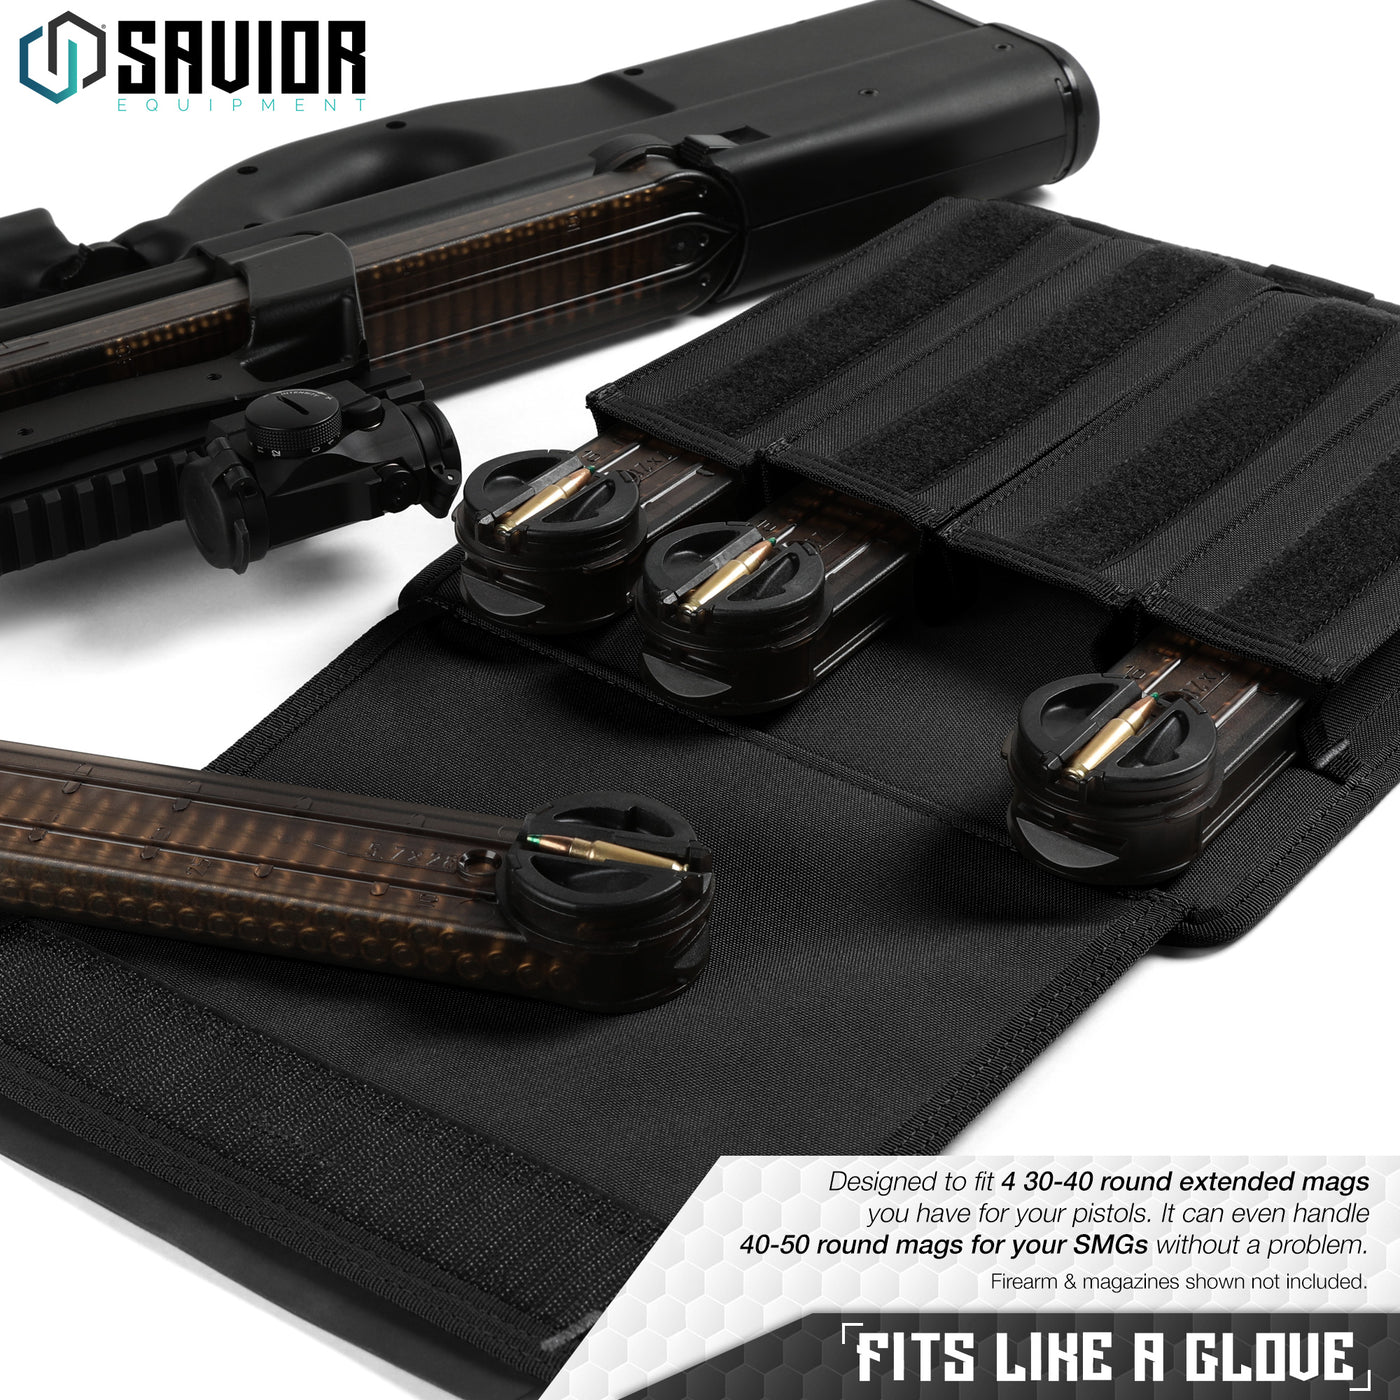 Fits Like A Glove - Designed to fit 4 30-40 round extended mags you have for your pistols. It can even handle 40-50 round mags for your SMGs without a problem. Firearms & magazines shown not included.